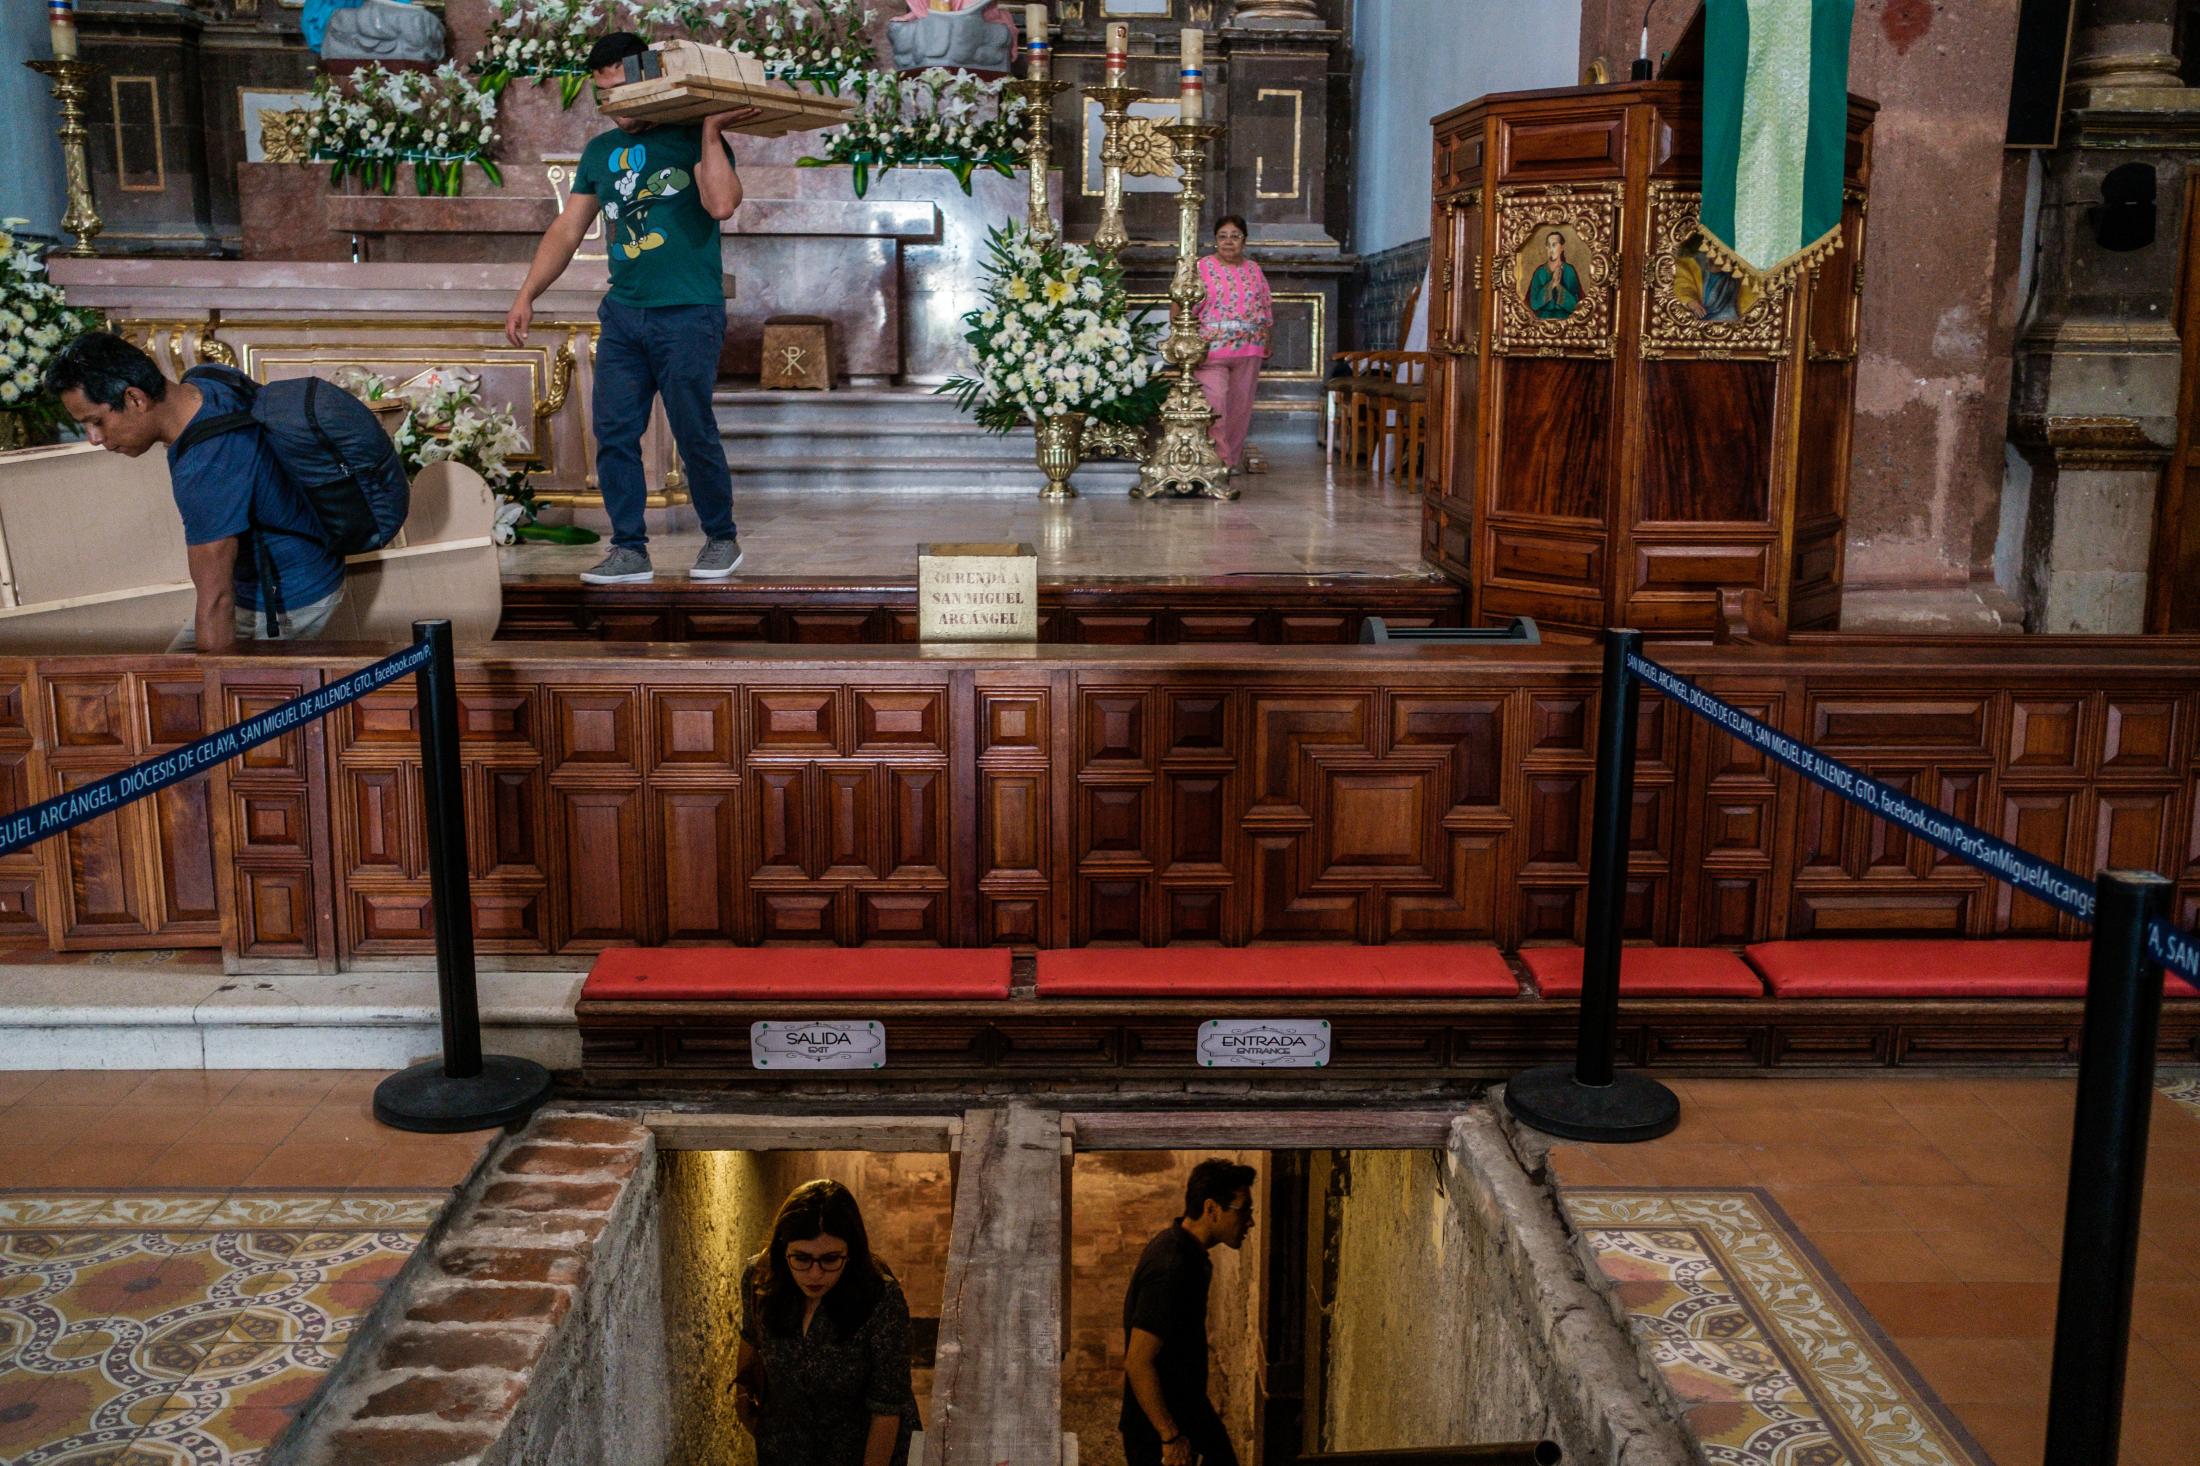 Catholicism in Mexico: An Exploration